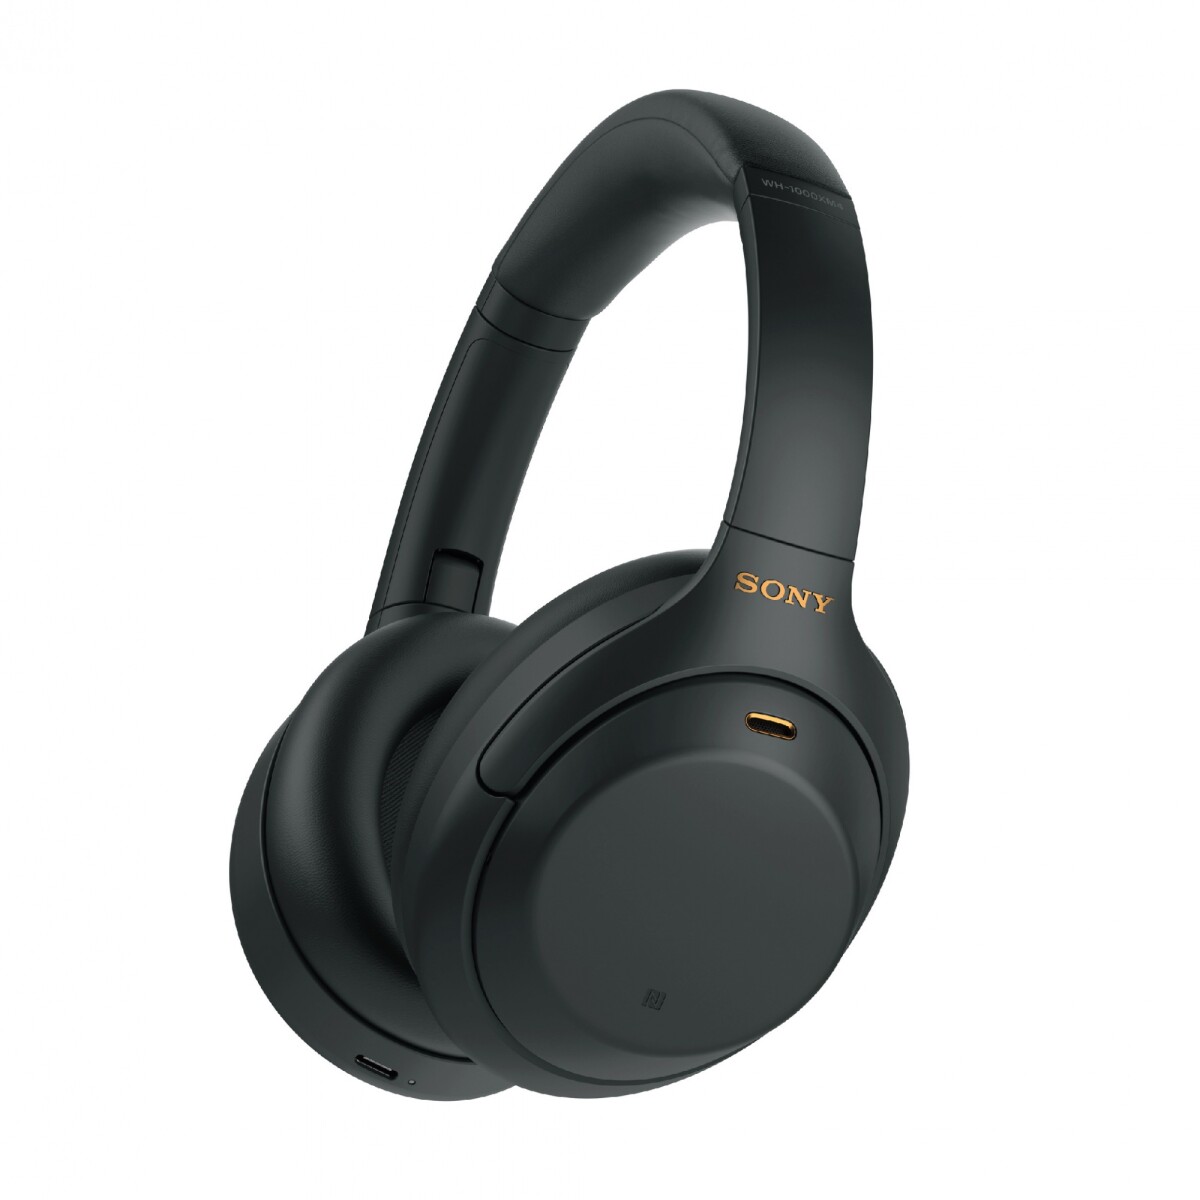 auriculares sony inalámbricos con noise cancelling wh-1000xm4 